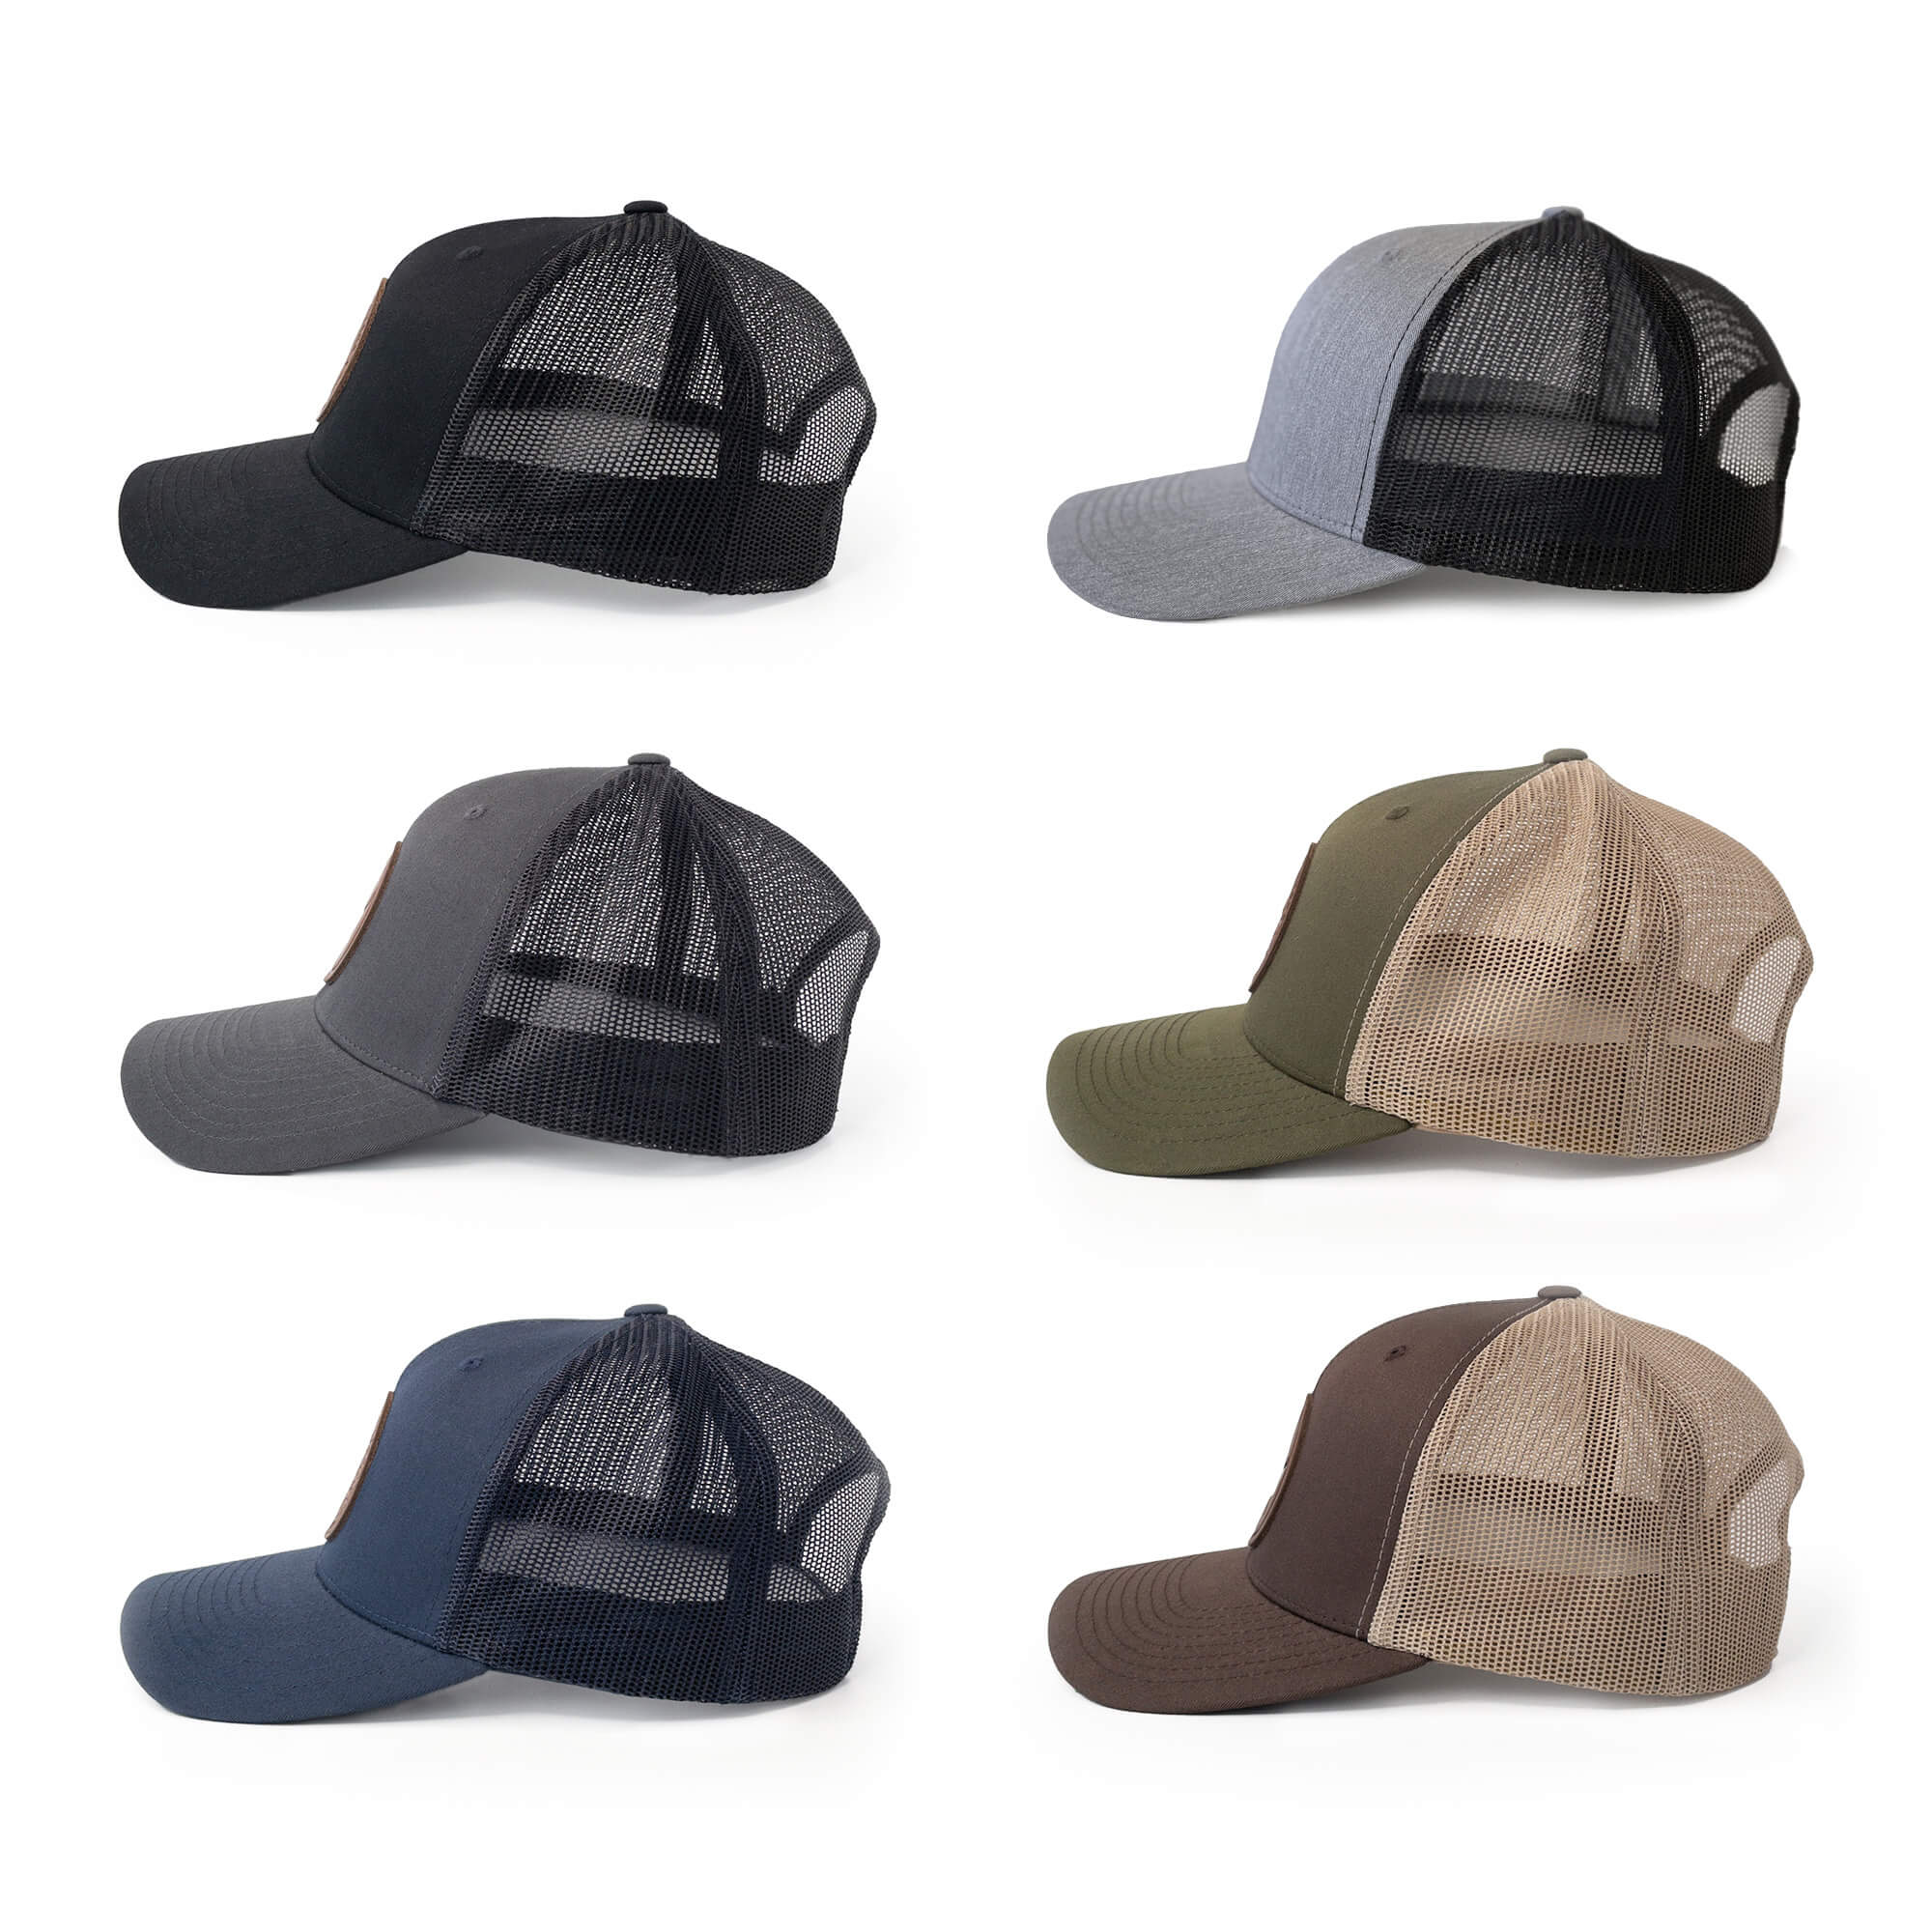 Leather patch trucker hats available in 6 colors | BLACK-002-005, CHARC-002-005, NAVY-002-005, HGREY-002-005, MOSS-002-005, BROWN-002-005